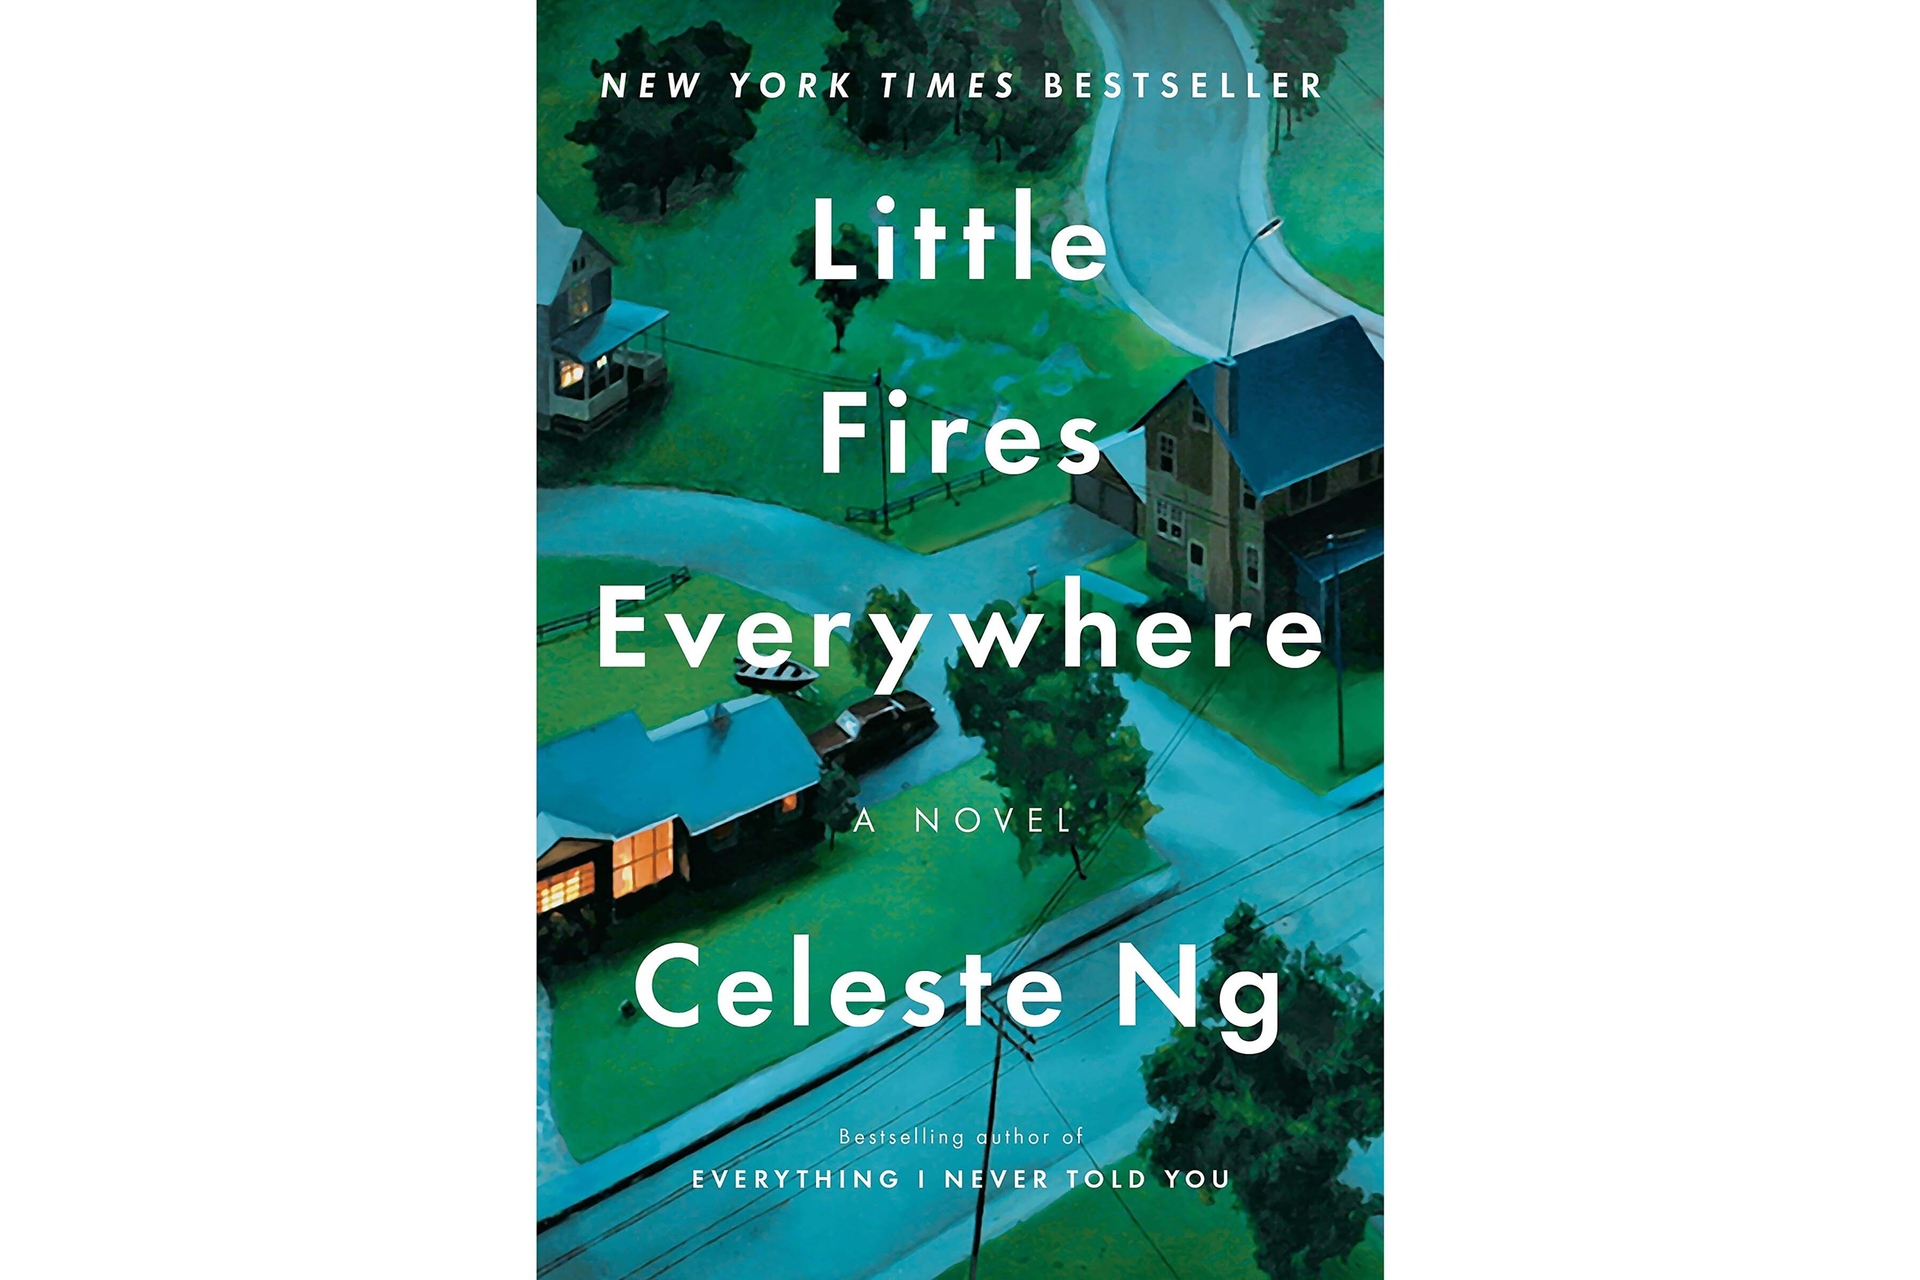 A neighborhood scene with lush green lawns, trees, and houses near one another. The book title, Little Fires Everhwyere, is in white print.